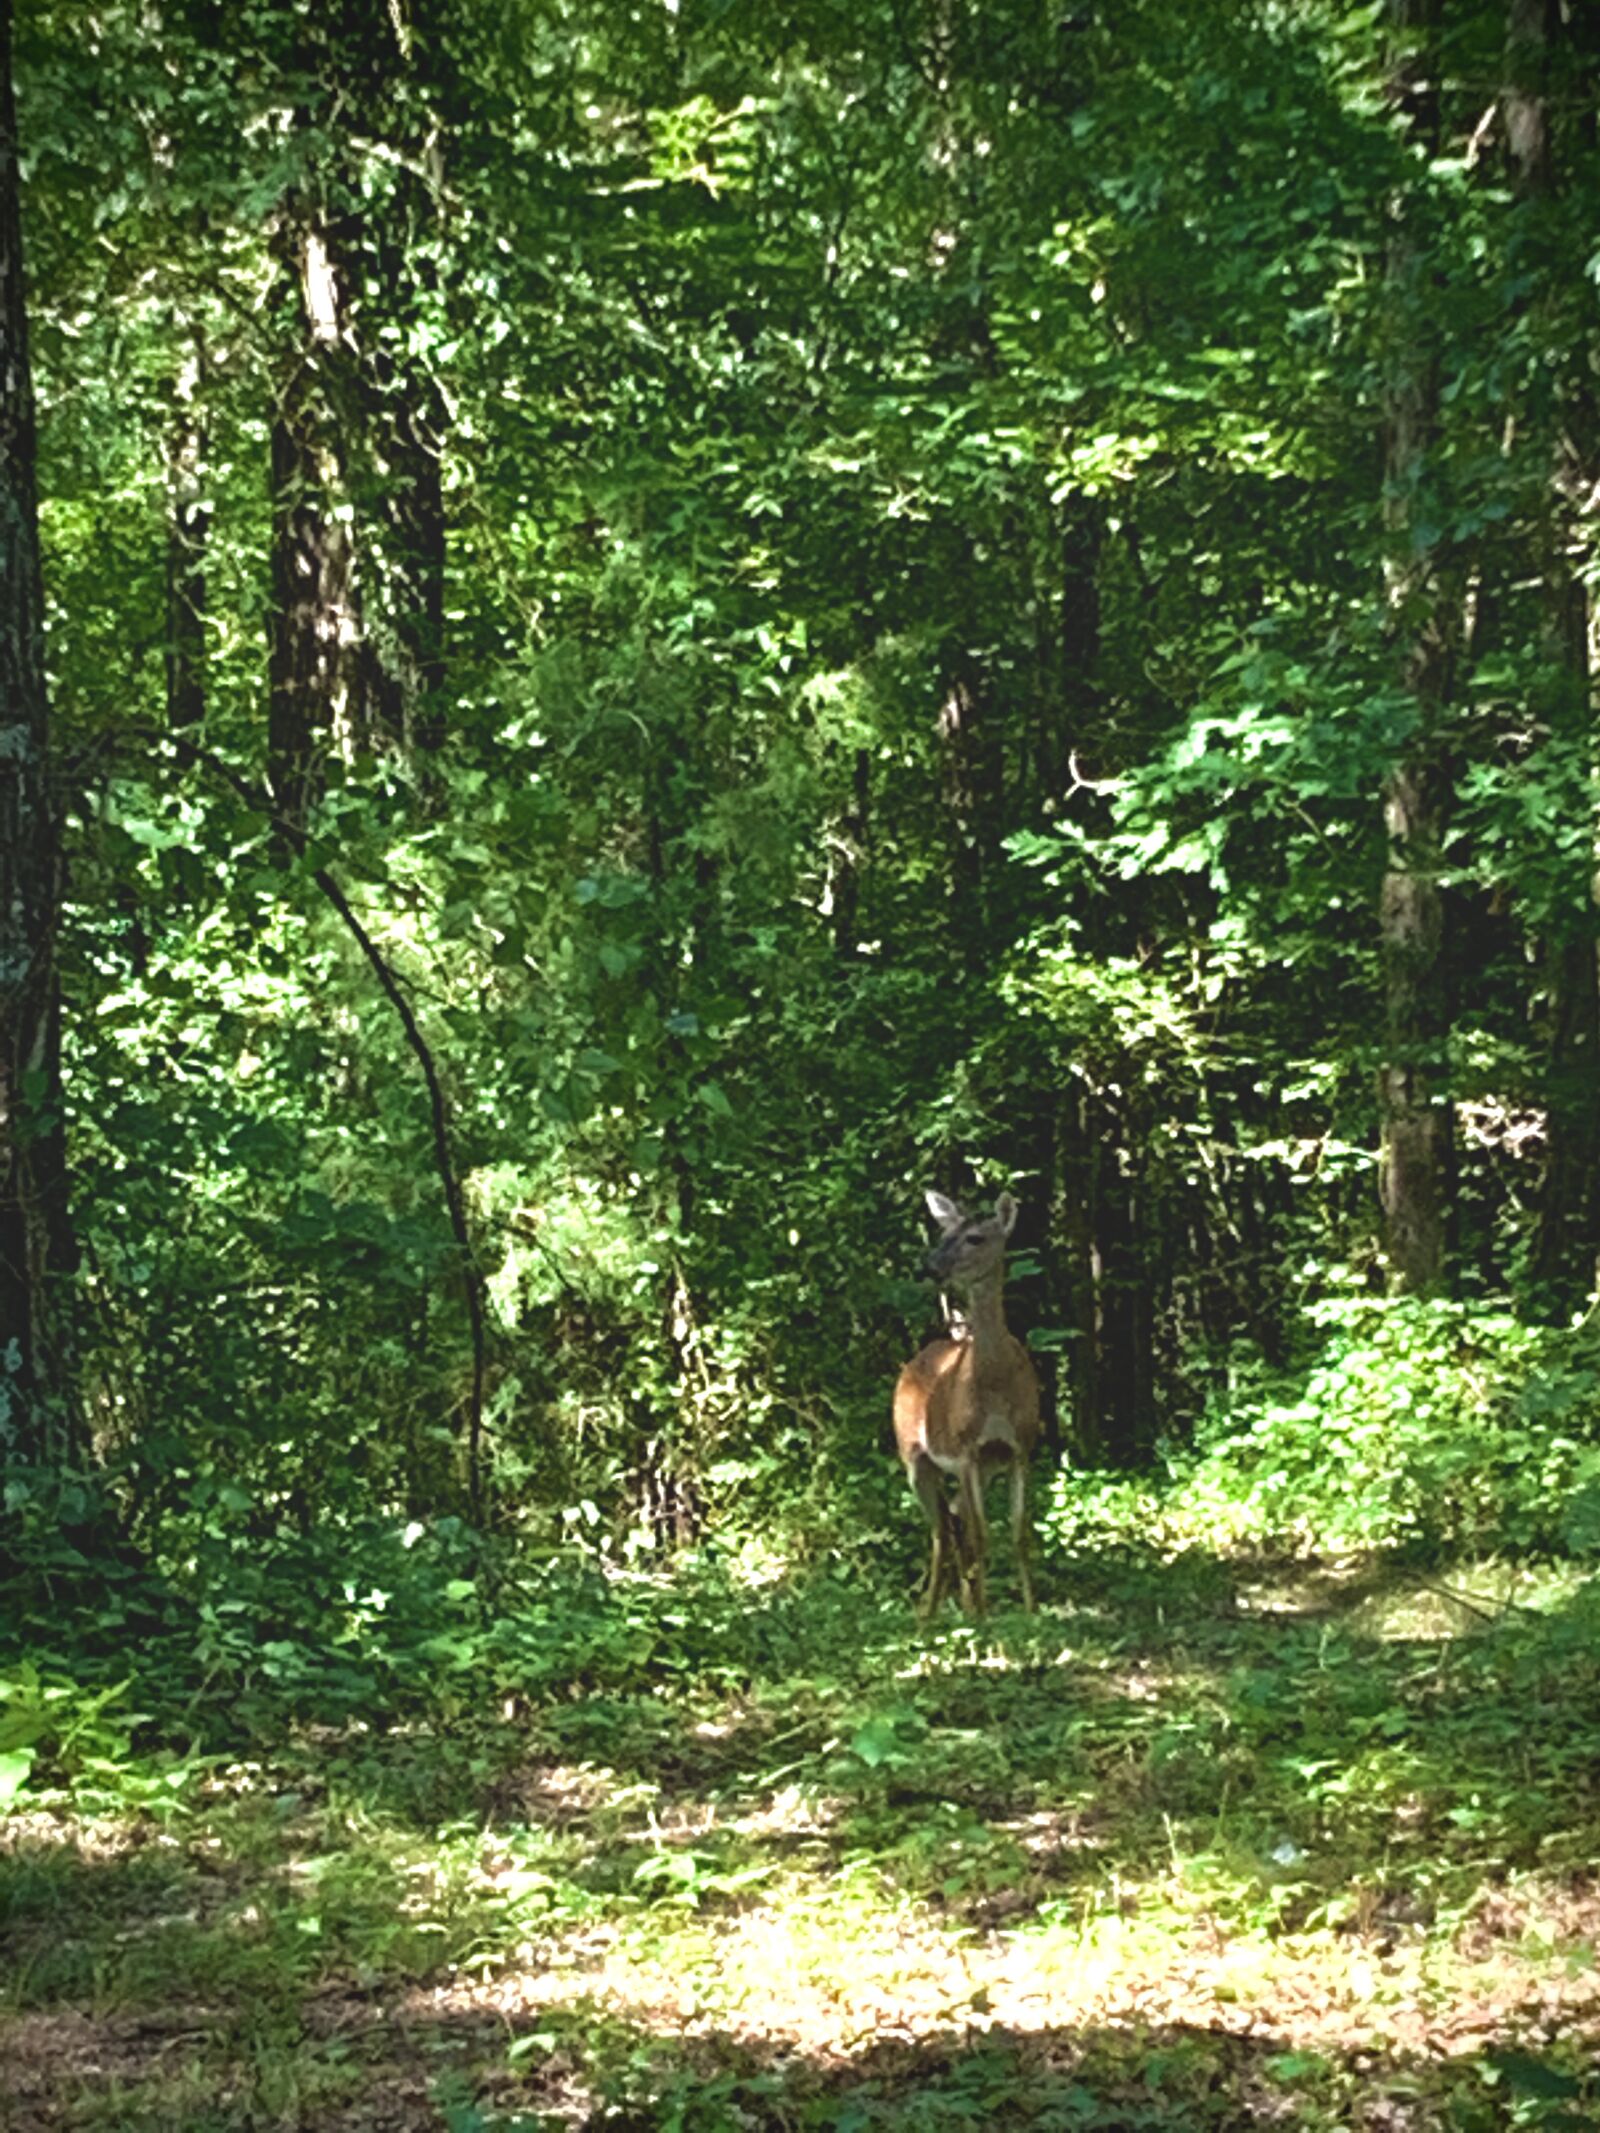 Apple iPhone XR sample photo. Deer, forest, nature photography